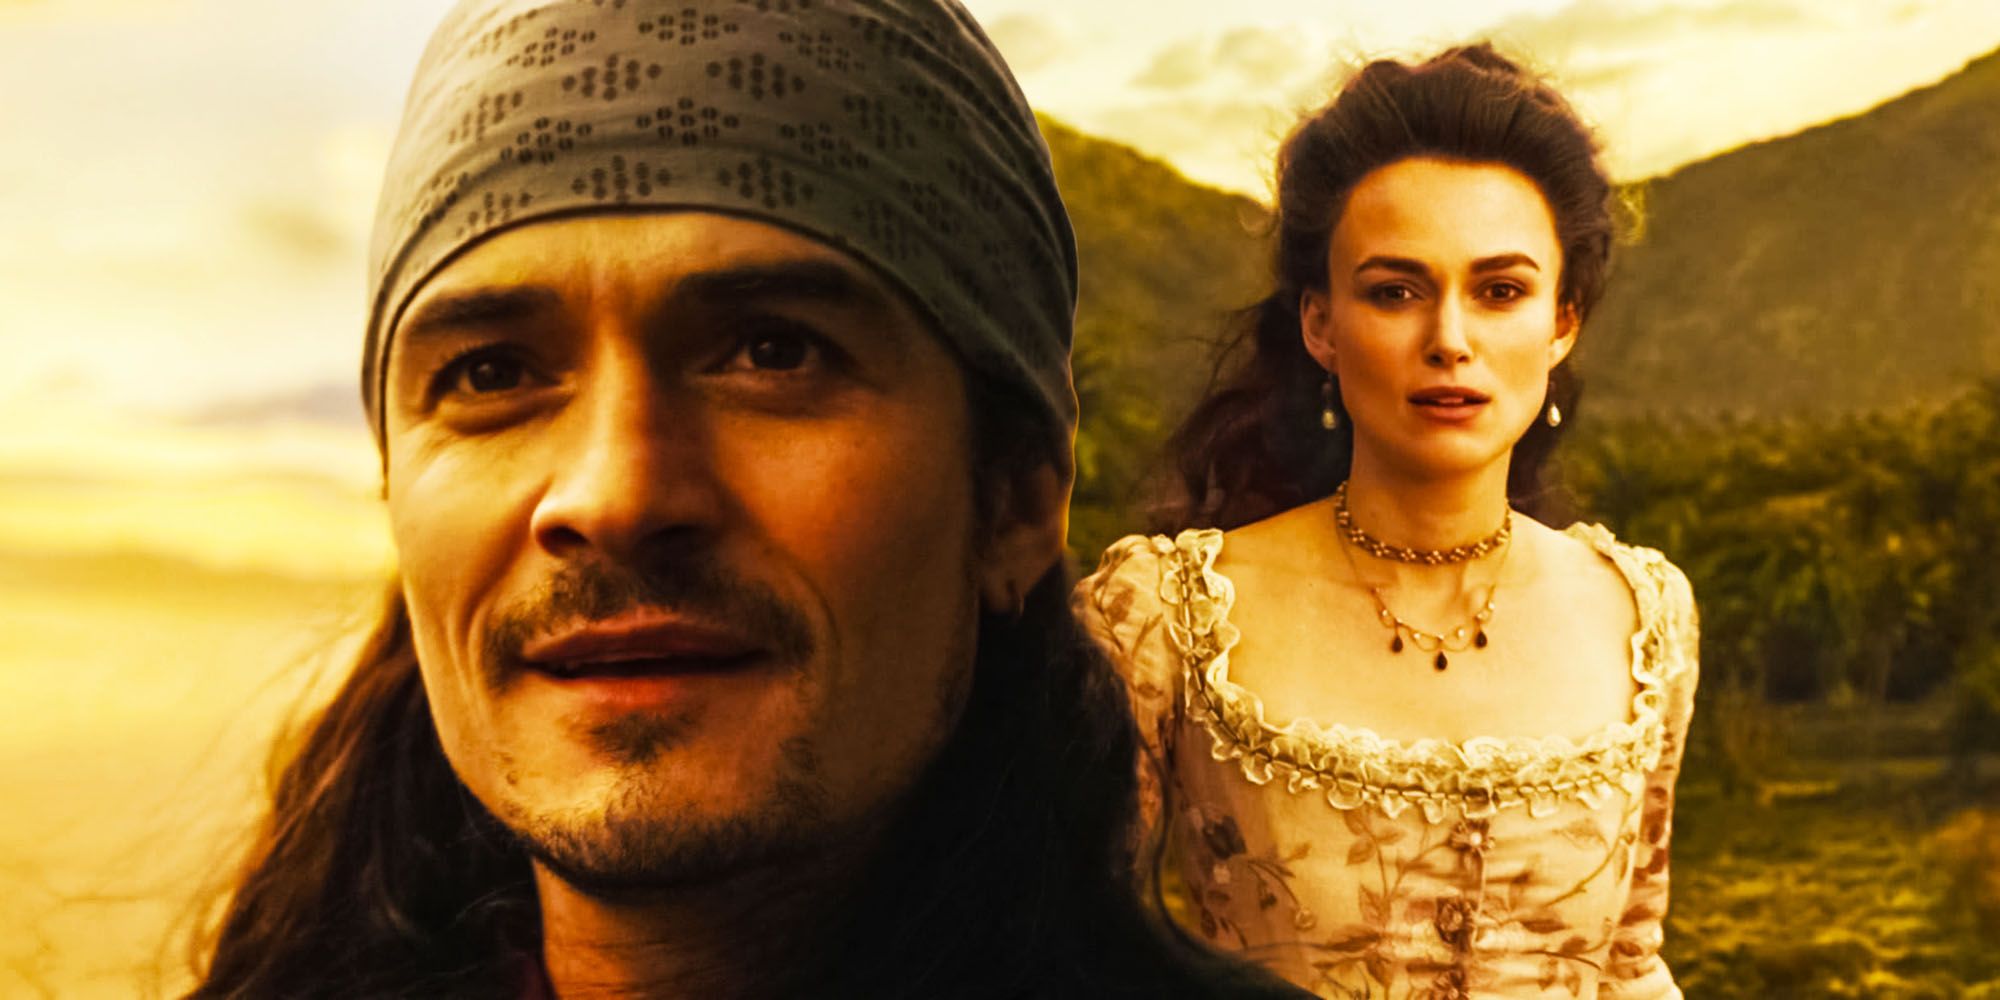 Orlando Bloom Is Returning For 'Pirates Of The Caribbean 5